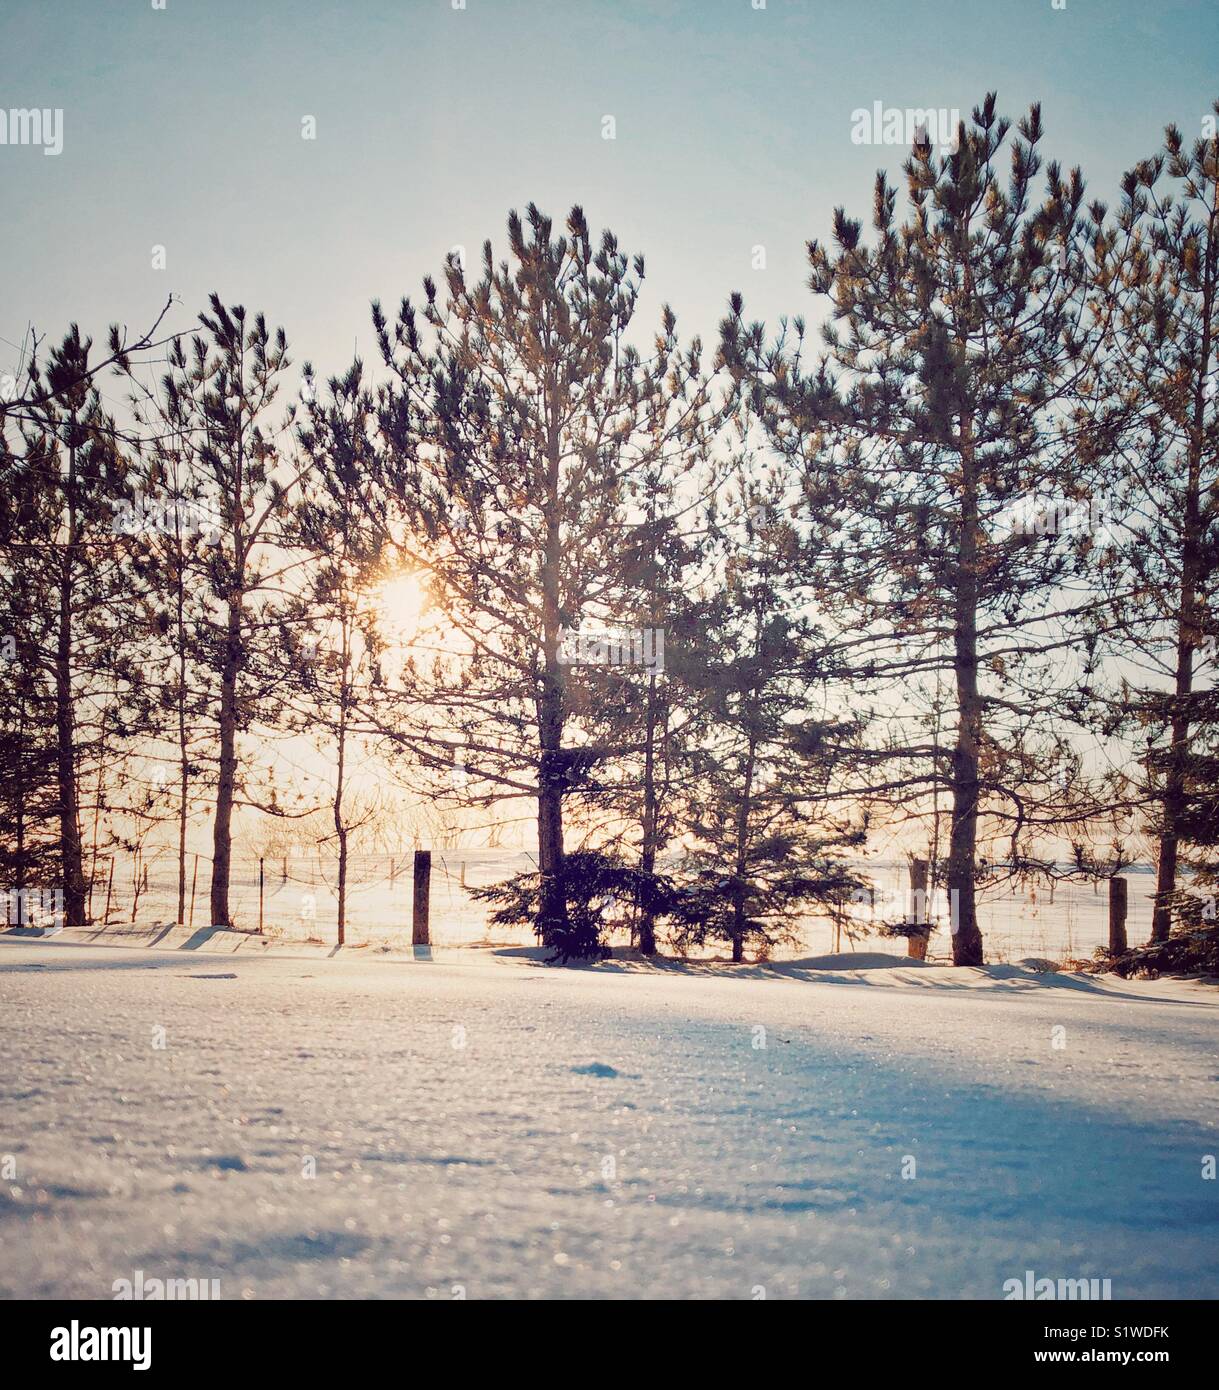 Sunset through pine trees and fence making snow sparkle in the foreground Stock Photo